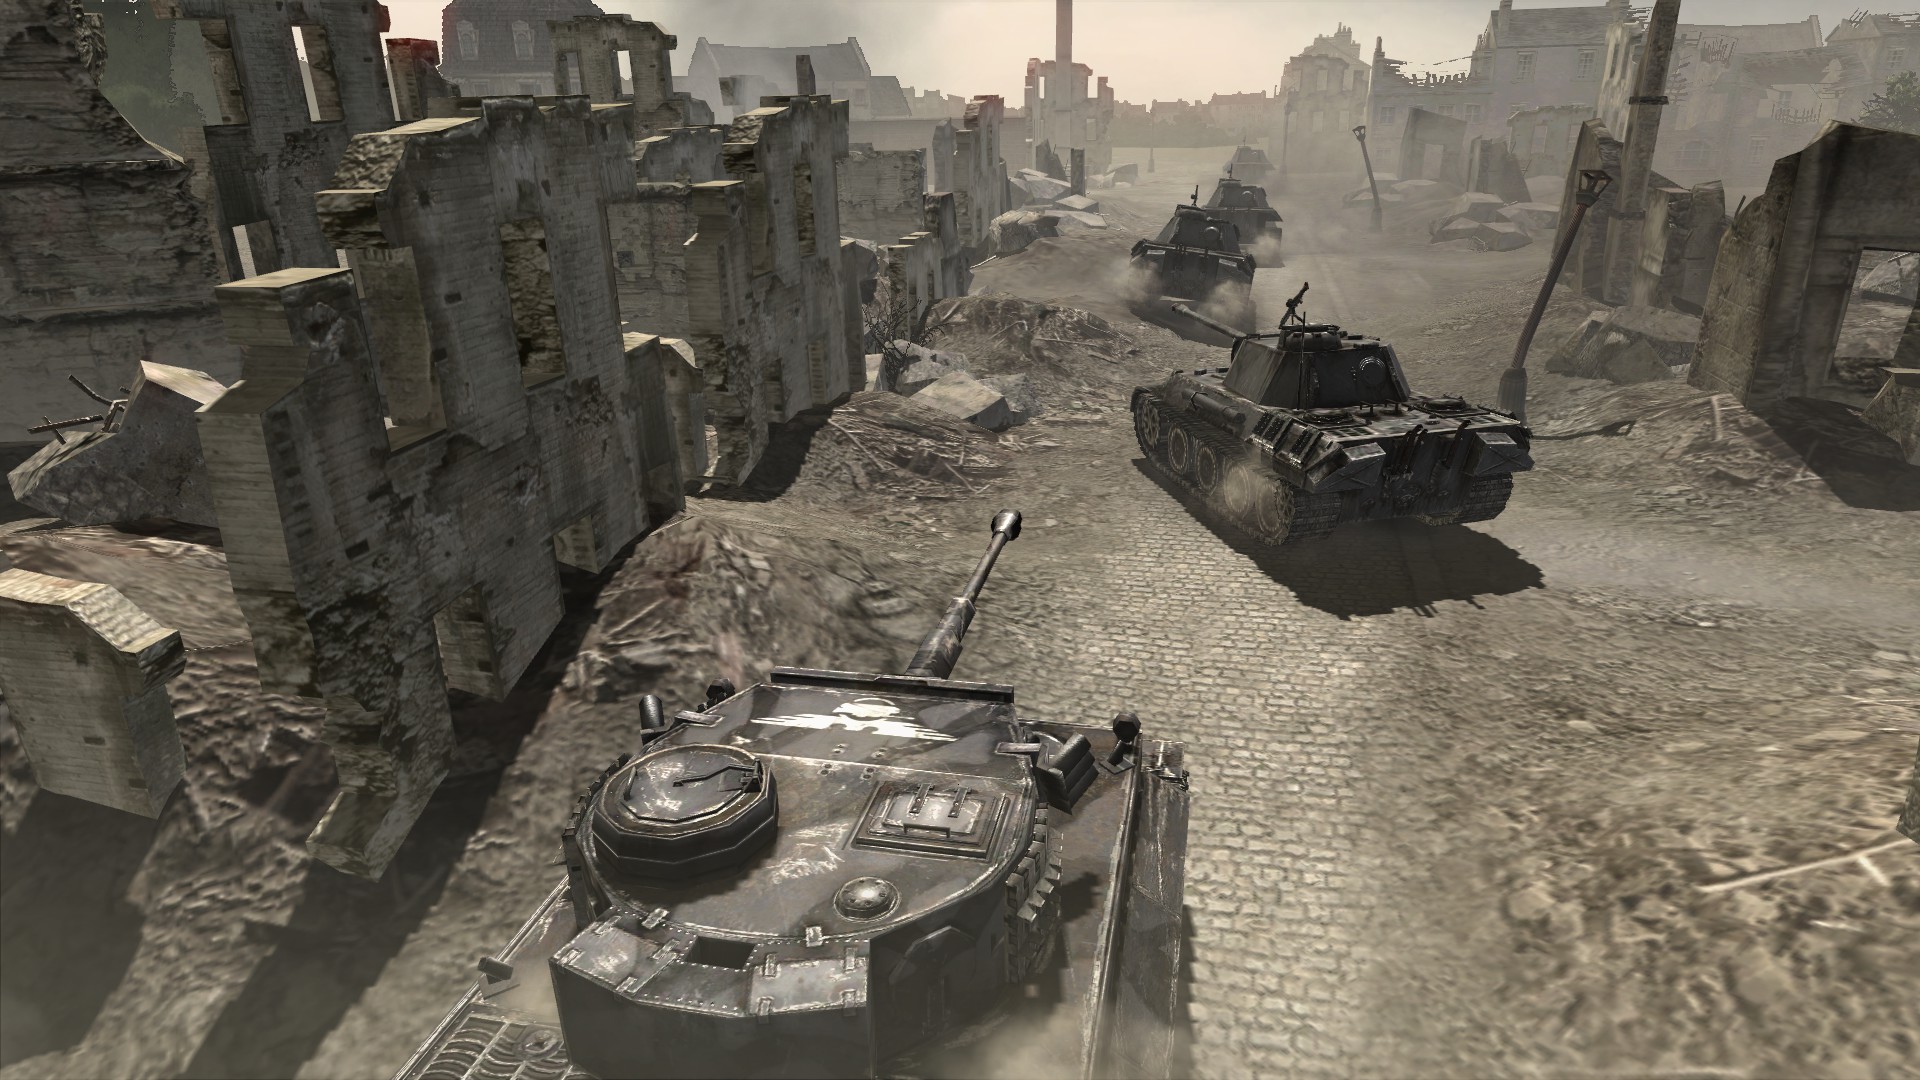 company of heroes 3 review reddit